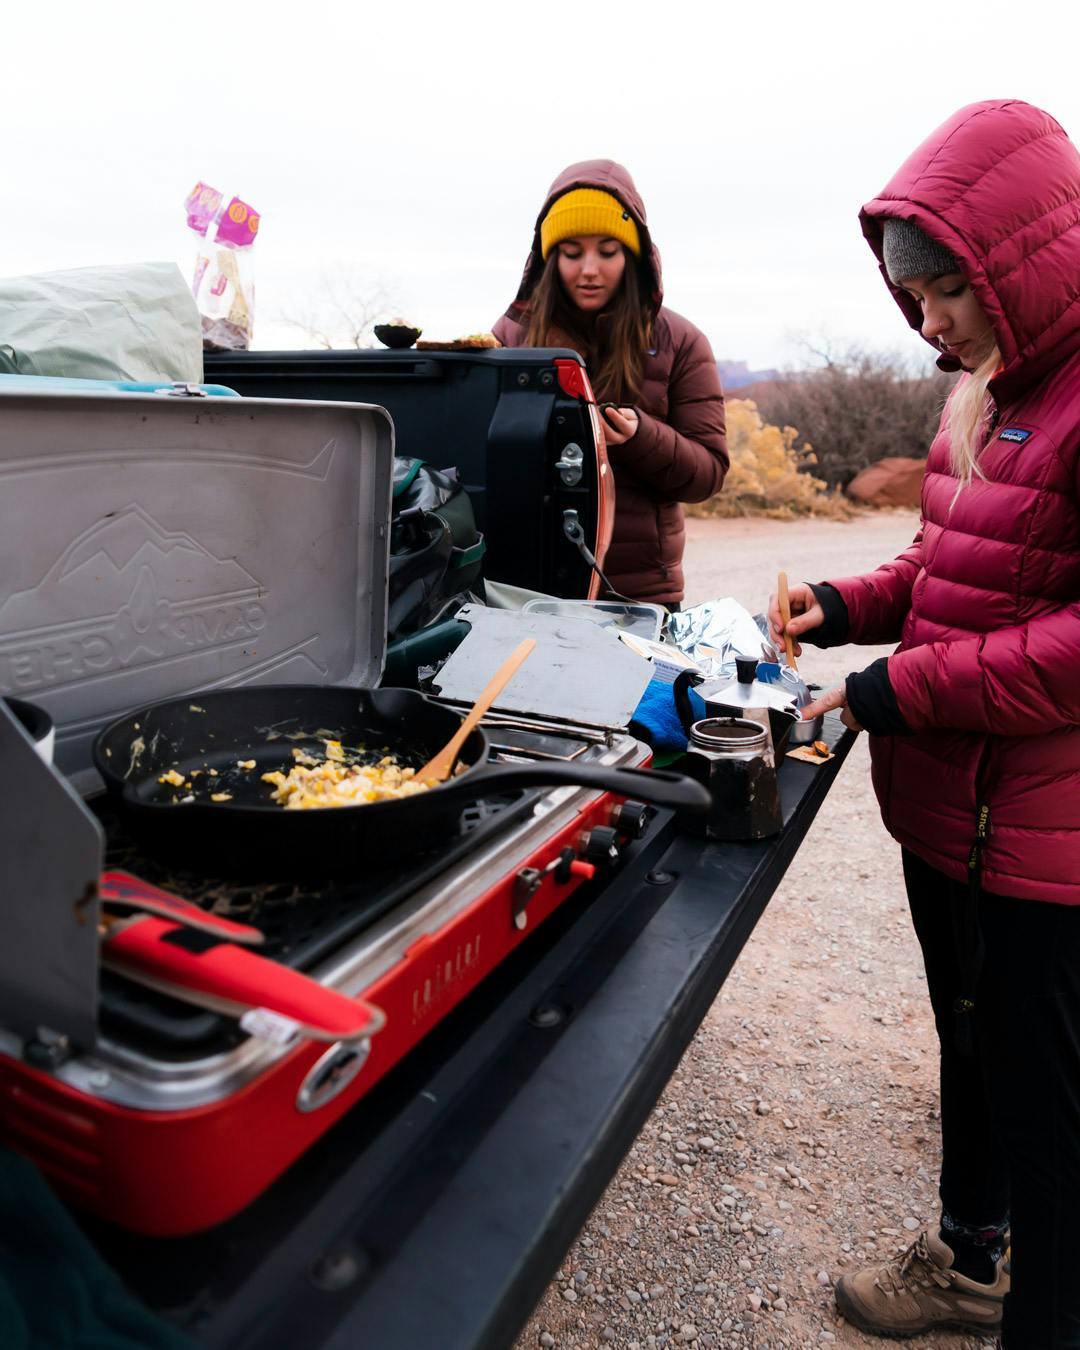 Two campers cooking on a tailgate with large, puffy jackets.